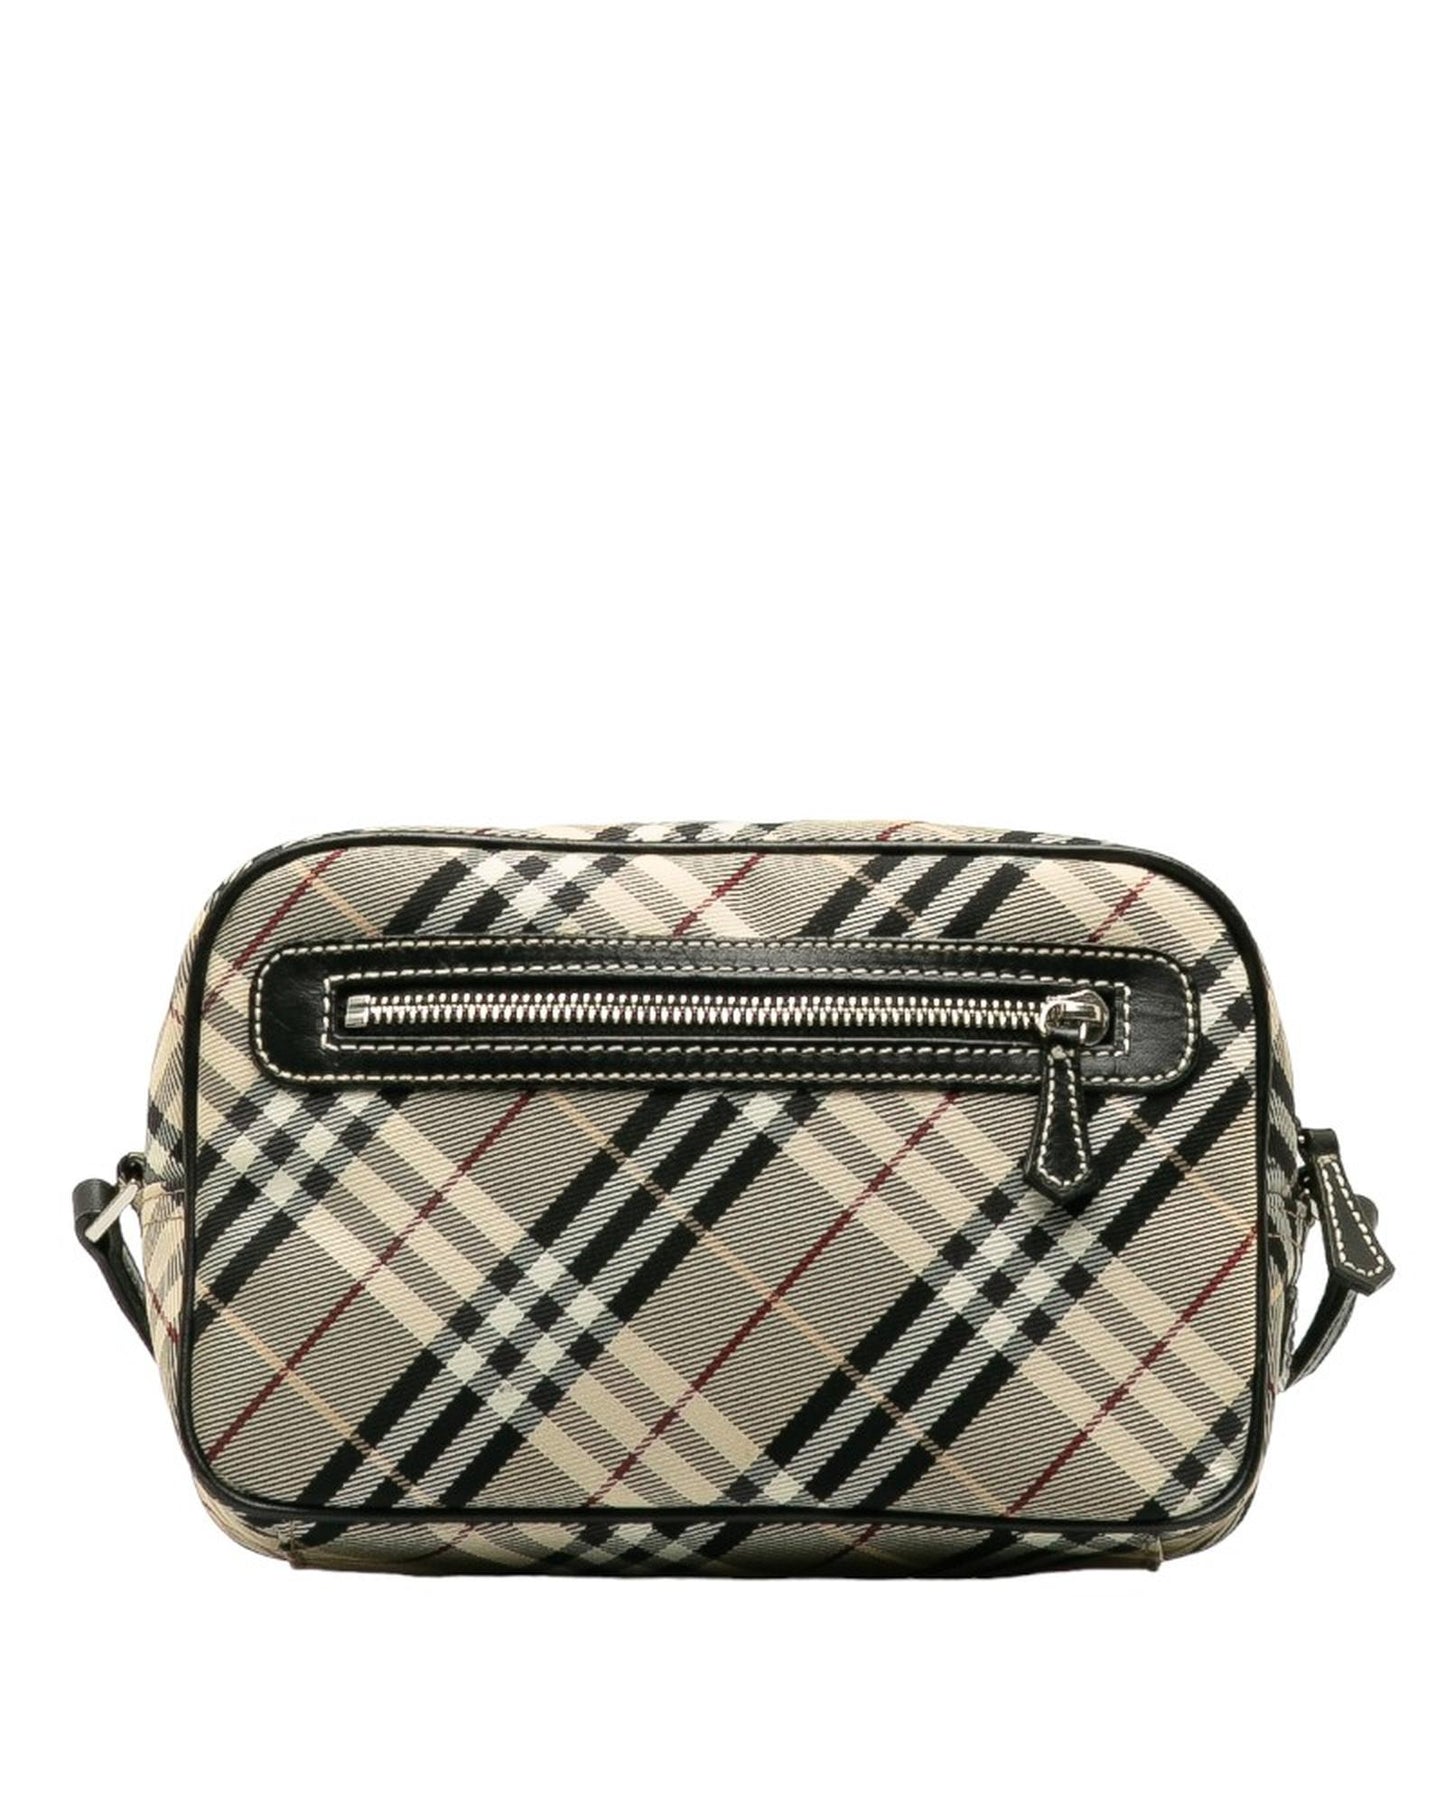 Burberry Women's Check Pattern Canvas Camera Bag - Preowned in Brown